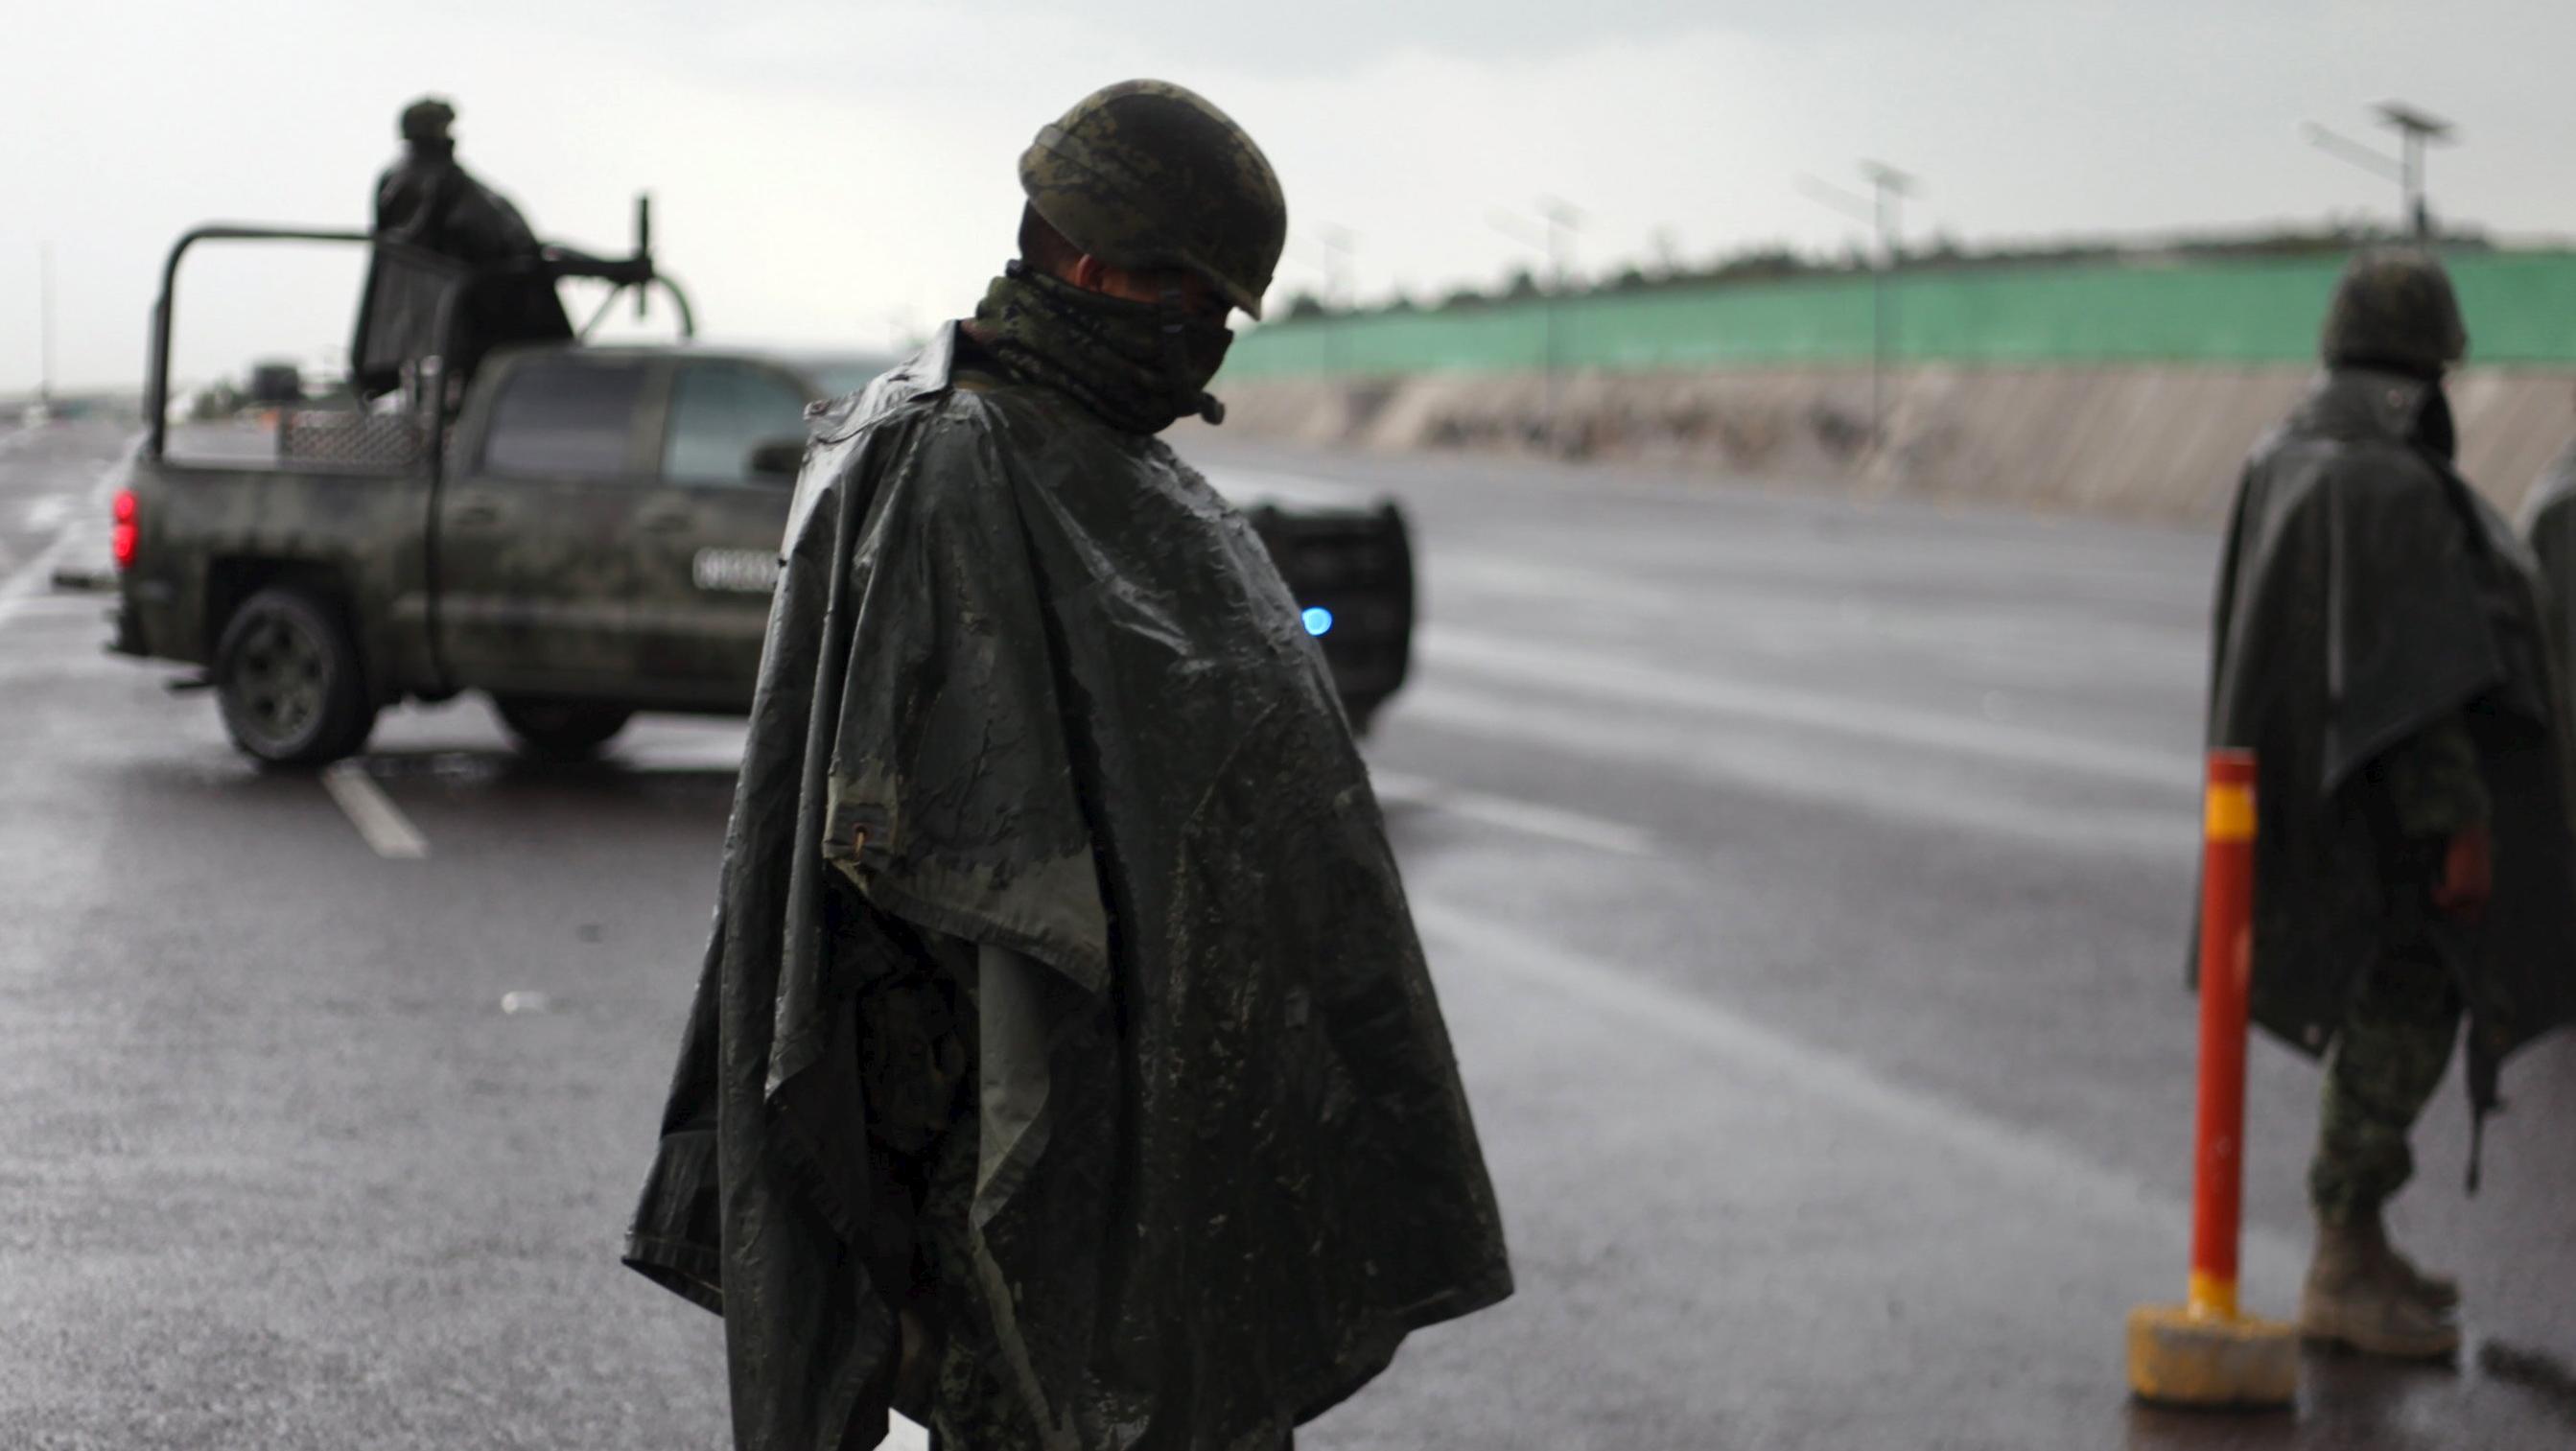 Soldiers stand guard at a checkpoint on a highway in Contepec, in Michoacan state, July 12, 2015.